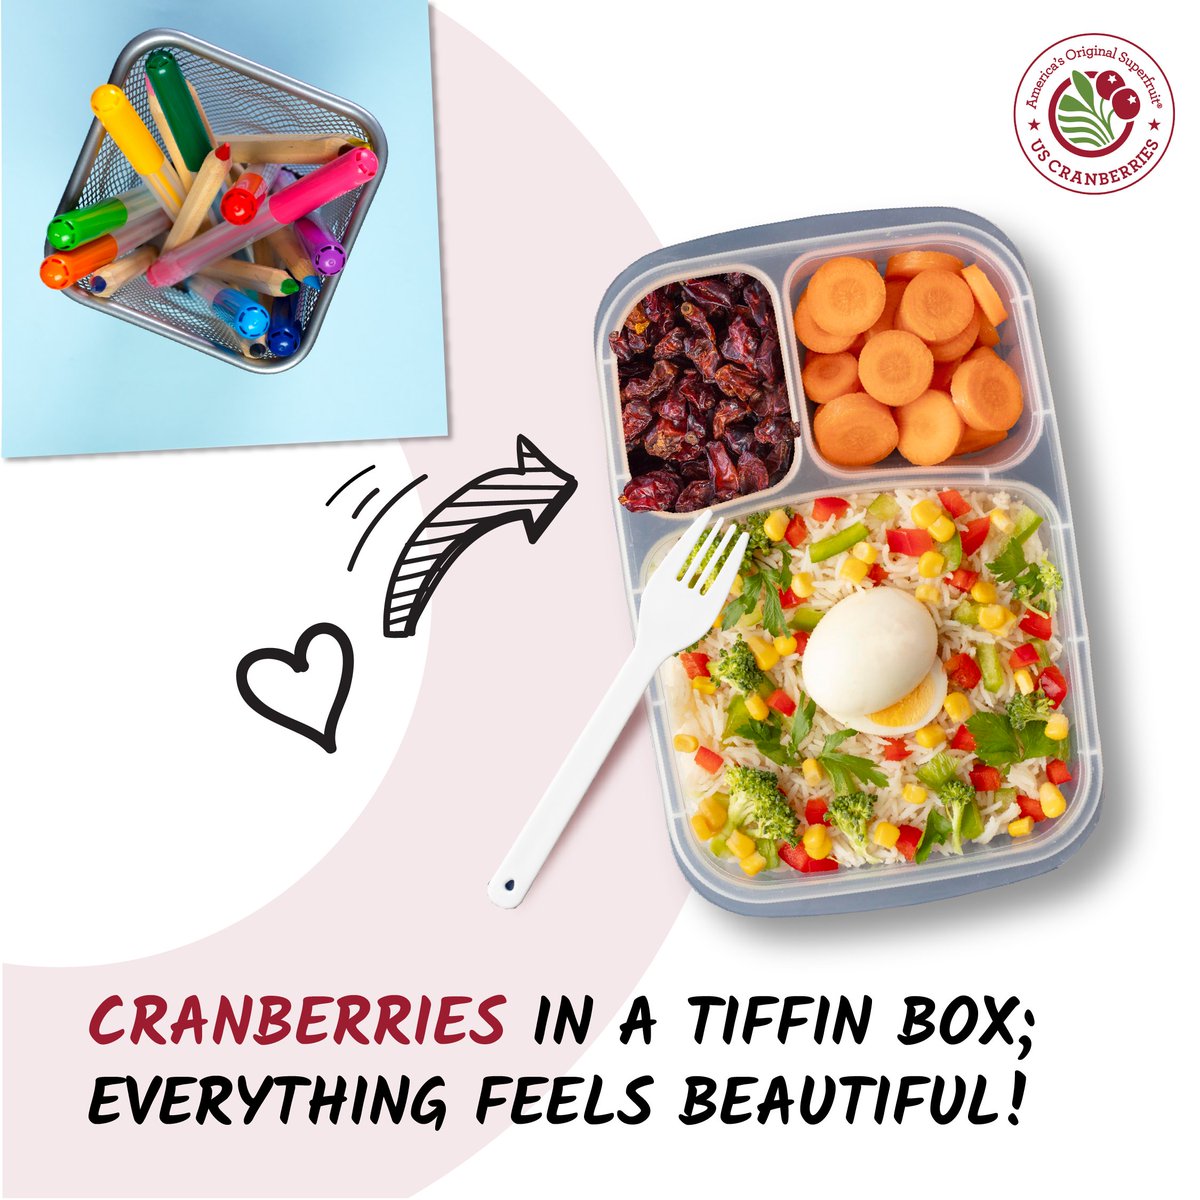 Cranberries are a great addition to your tiffin box!

#USCranberries #USCranberriesIndia #cranberries #FoodieAdventure #CranberryMagic #LunchJoy #FlavorfulBites